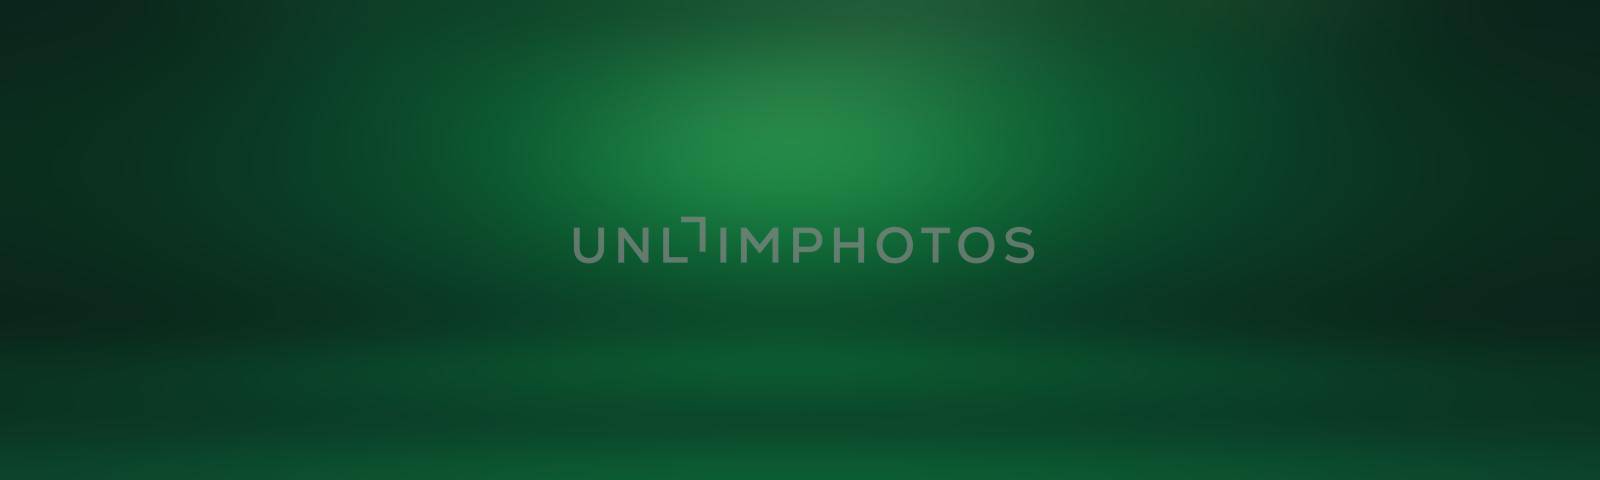 Luxury plain Green gradient abstract studio background empty room with space for your text and picture.